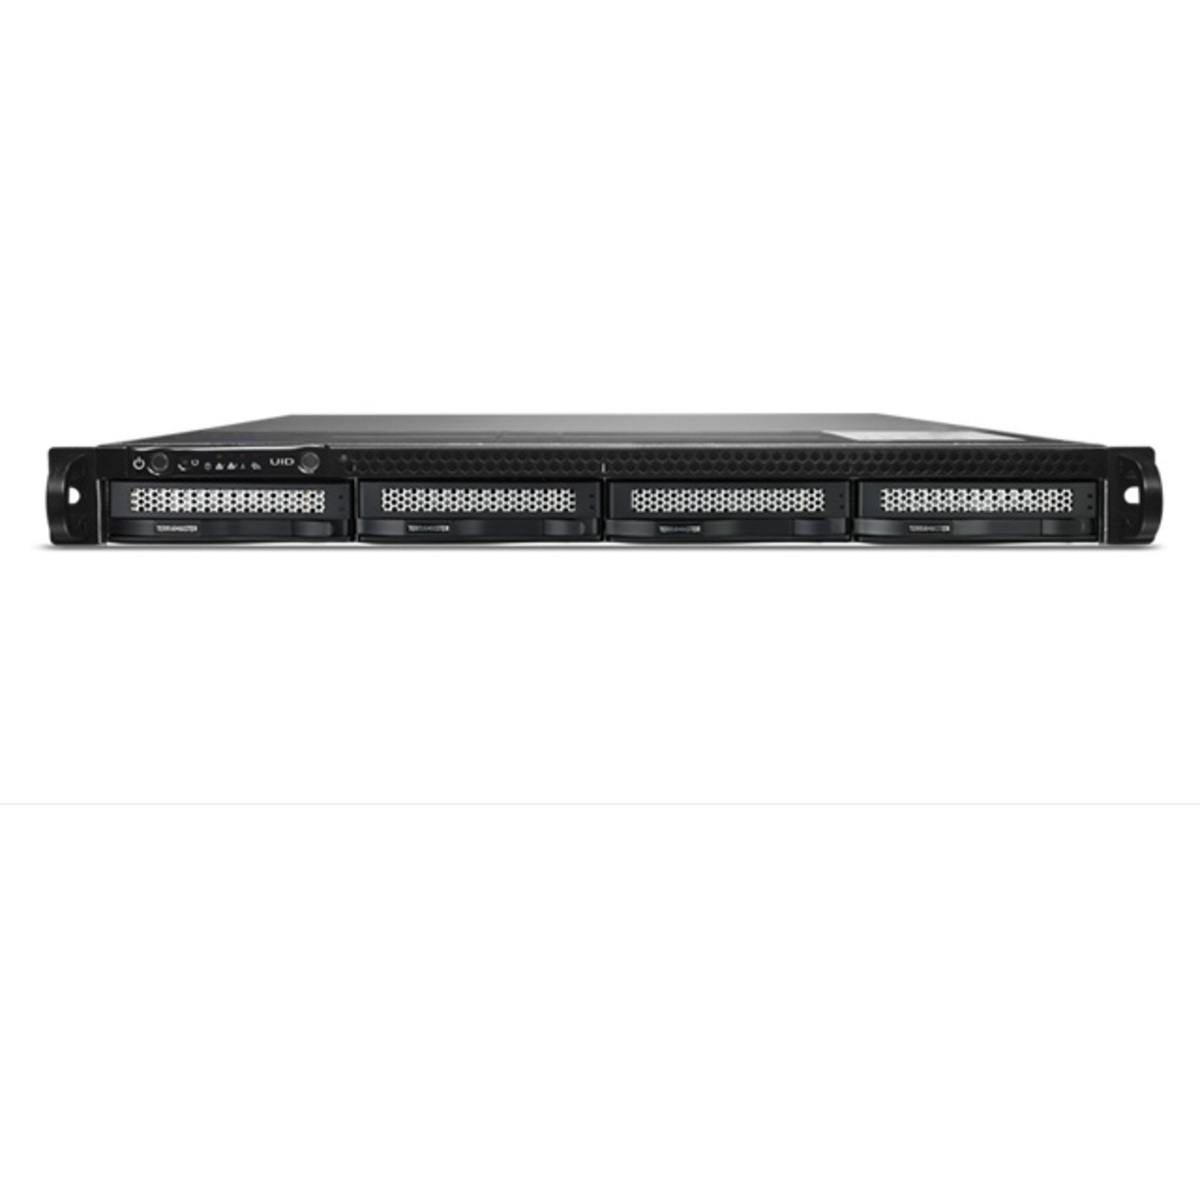 TerraMaster U4-111 96tb 4-Bay RackMount Multimedia / Power User / Business NAS - Network Attached Storage Device 4x24tb Seagate EXOS X24 ST24000NM002H 3.5 7200rpm SATA 6Gb/s HDD ENTERPRISE Class Drives Installed - Burn-In Tested U4-111